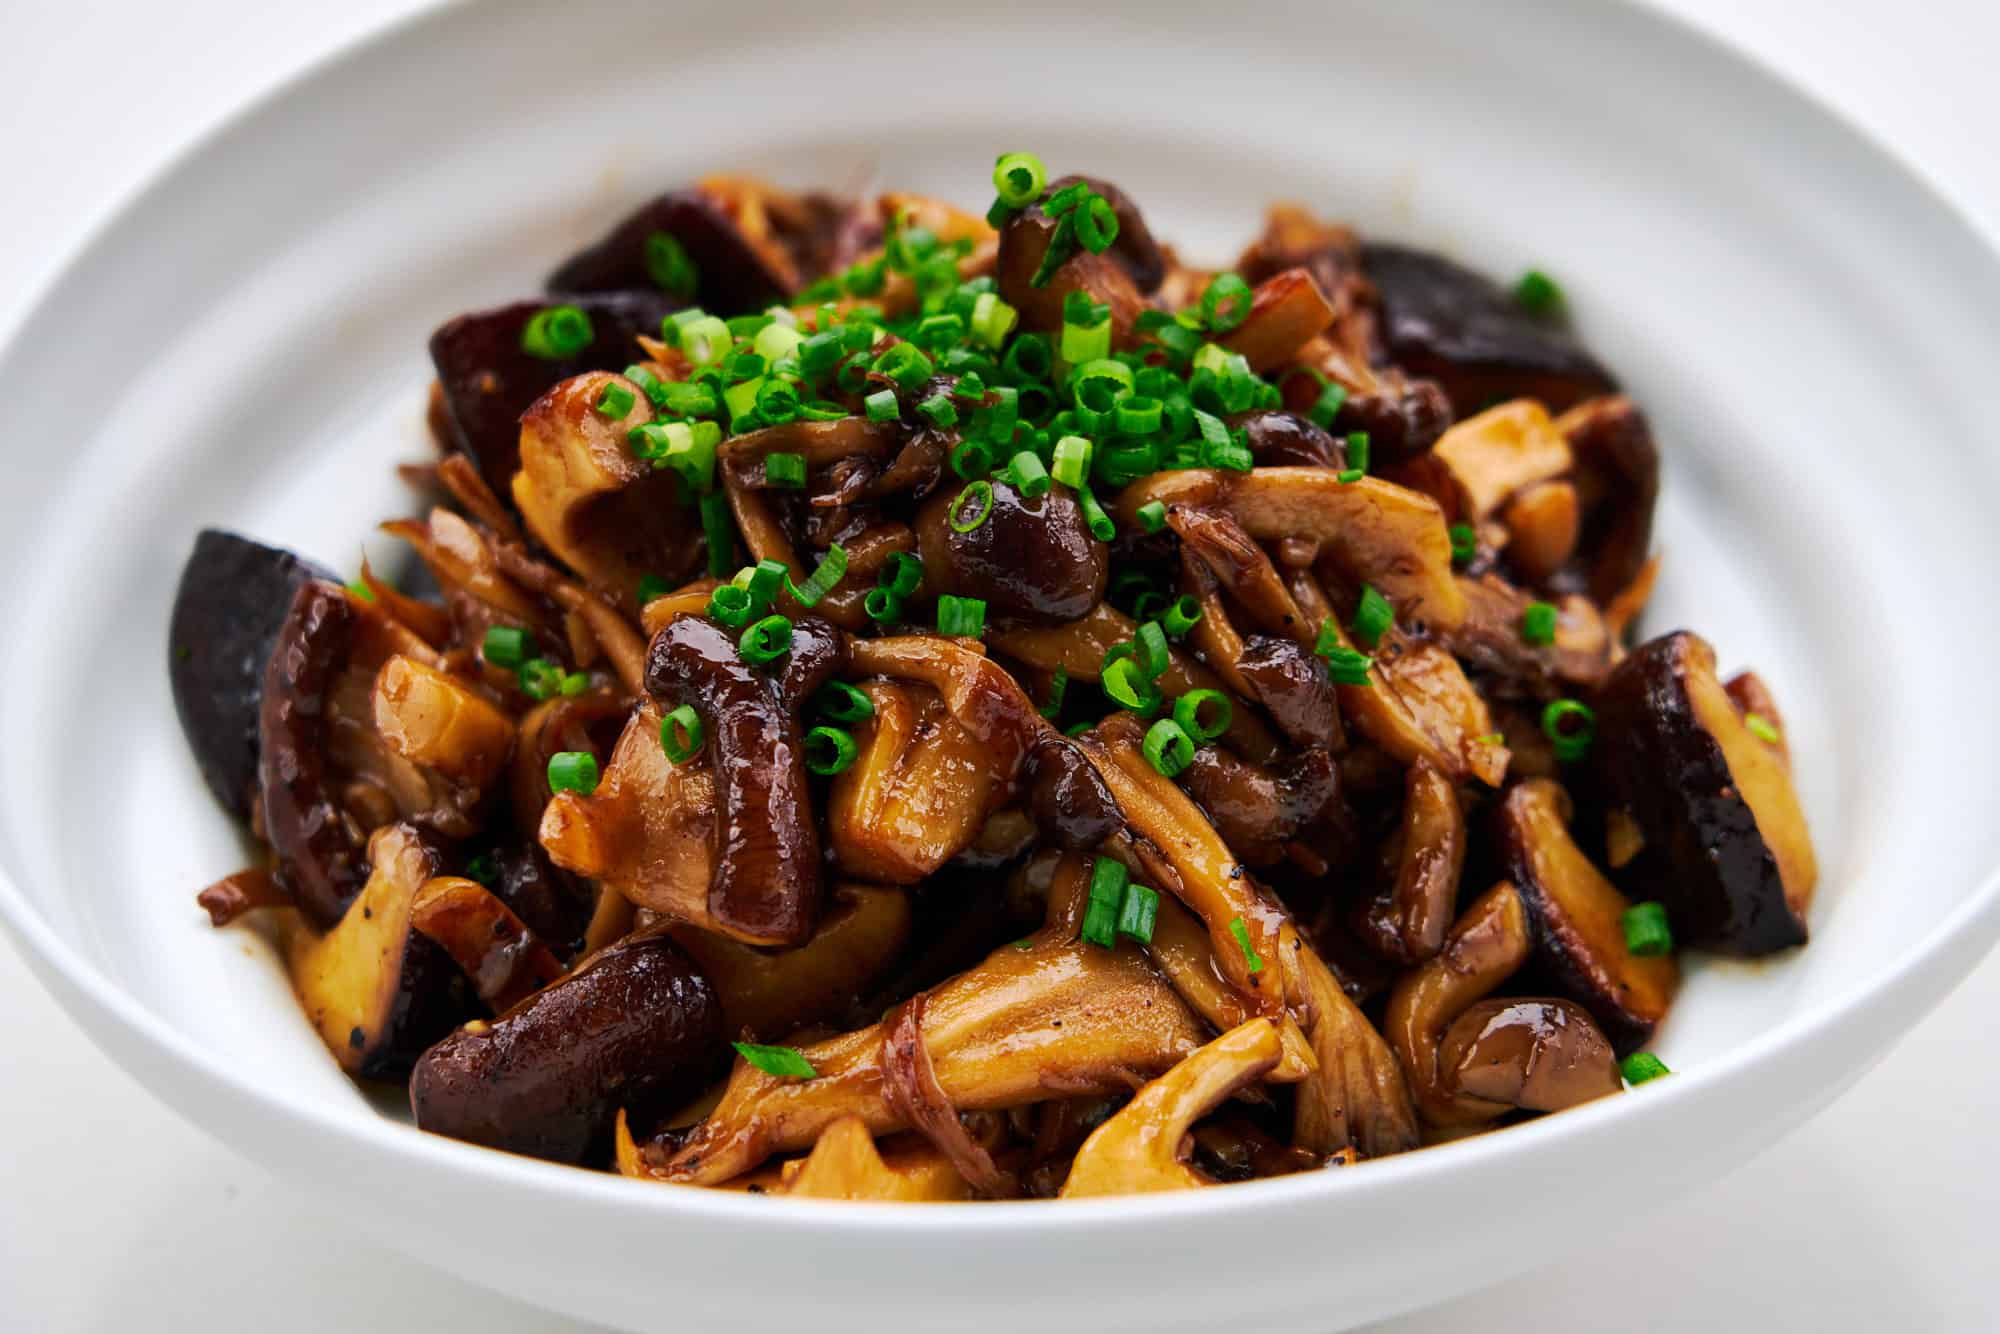 Mixed Japanese mushrooms glazed with soy sauce, honey, and balsamic vinegar.